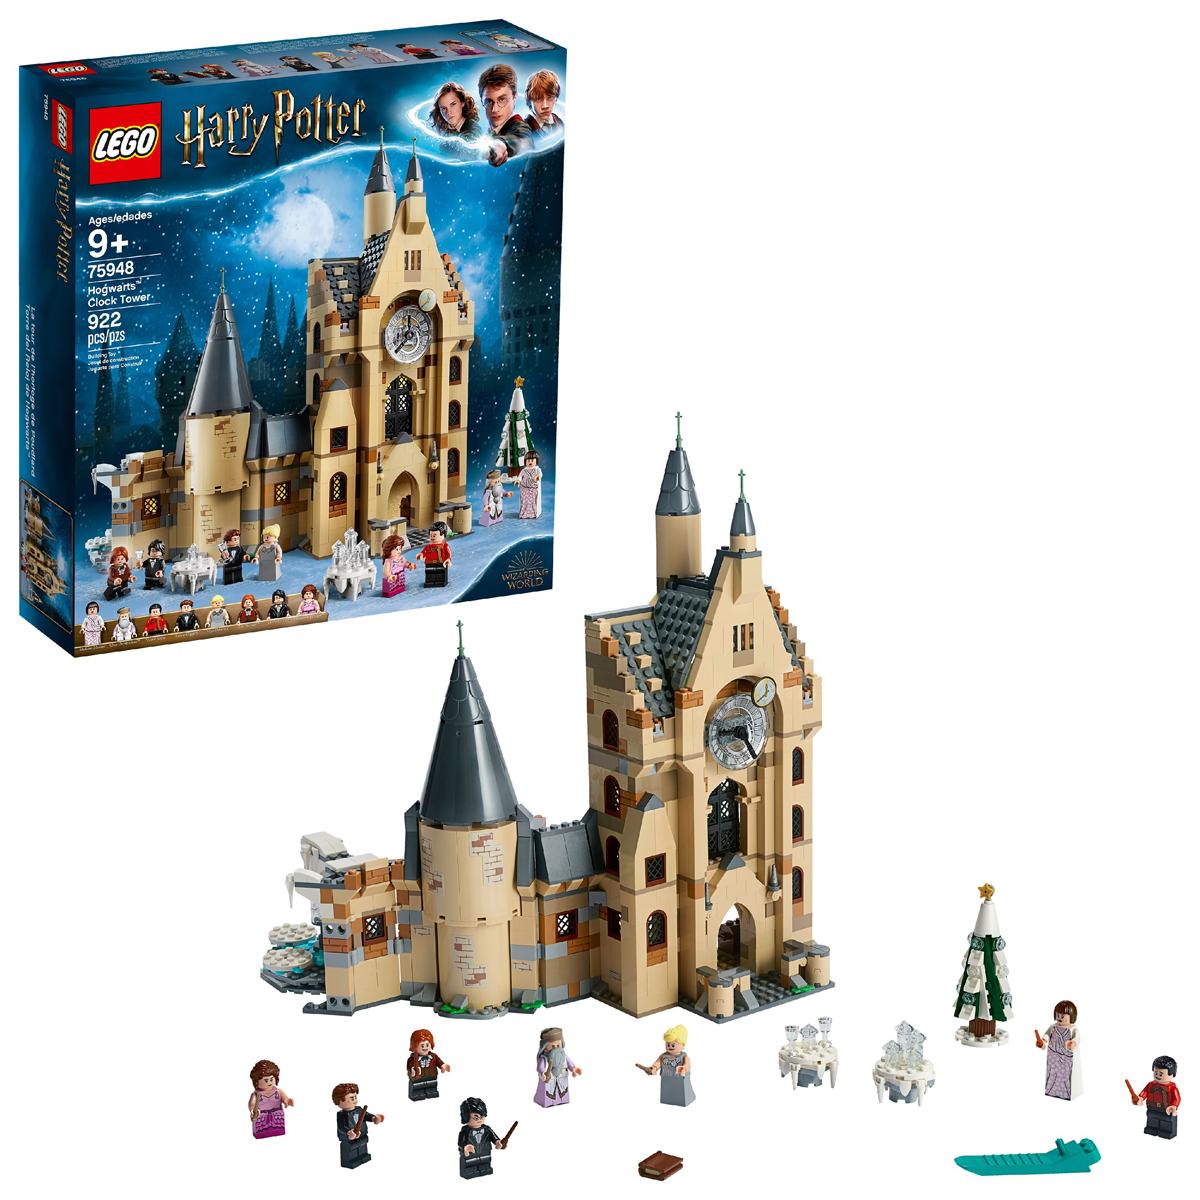 Lego Harry Potter and The Goblet of Fire Hogwarts Castle Clock Tower for $72 Shipped